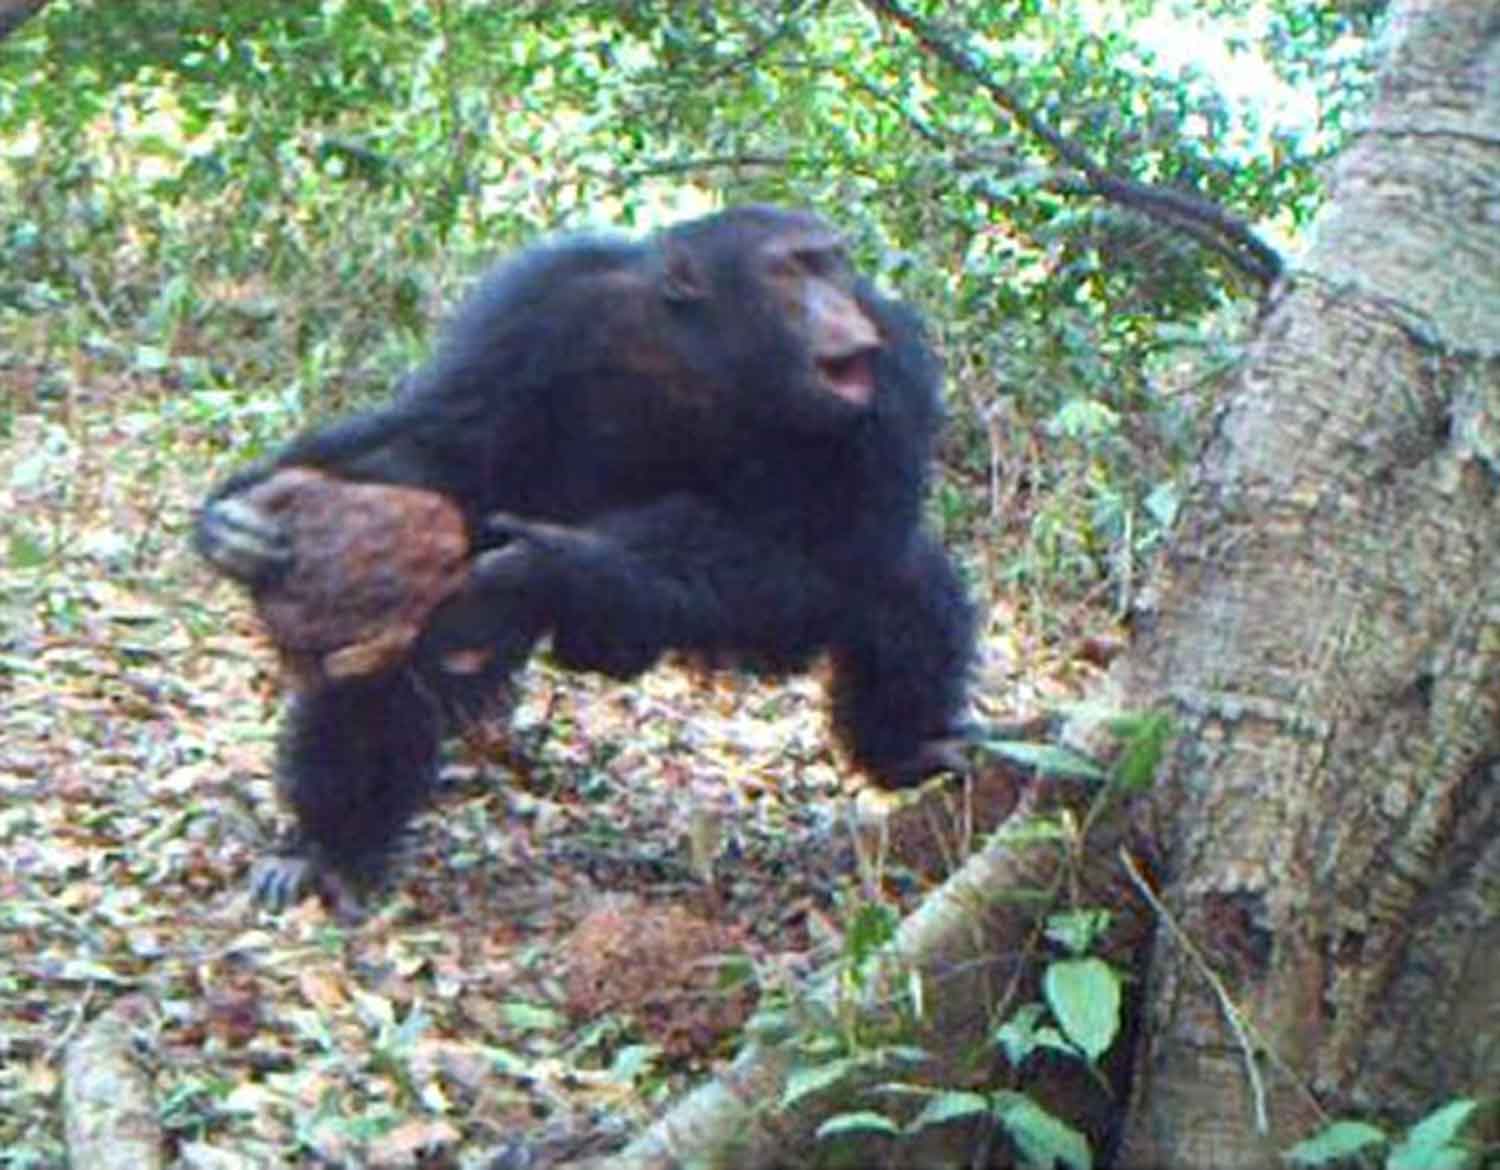 A chimpanzee blurred from motion in the action of throwing a stone at a tree